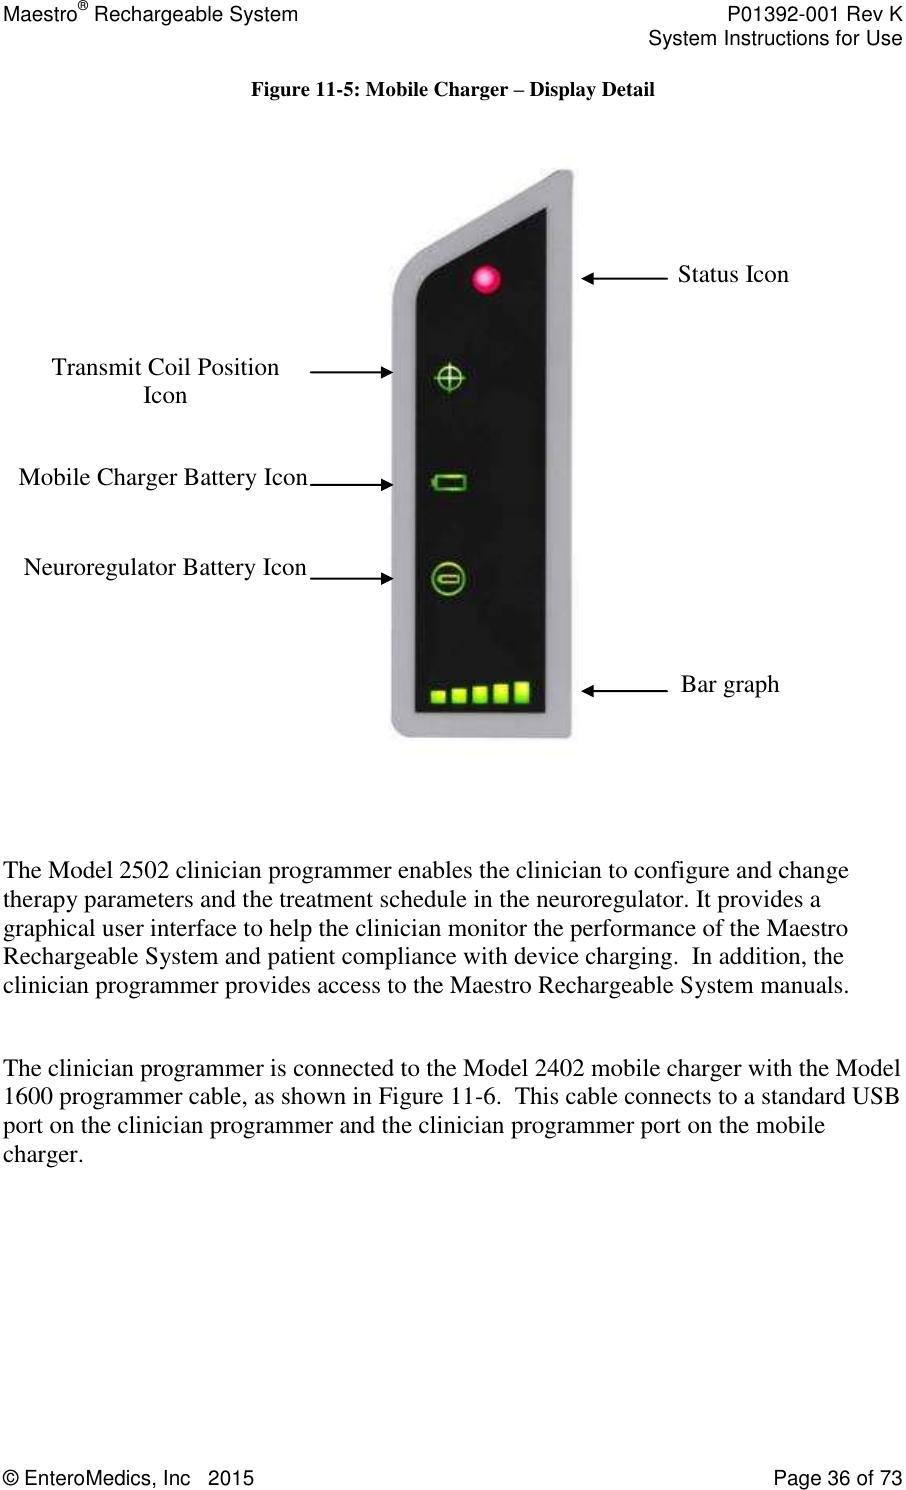 Maestro® Rechargeable System    P01392-001 Rev K     System Instructions for Use  © EnteroMedics, Inc   2015  Page 36 of 73  Figure 11-5: Mobile Charger – Display Detail     The Model 2502 clinician programmer enables the clinician to configure and change therapy parameters and the treatment schedule in the neuroregulator. It provides a graphical user interface to help the clinician monitor the performance of the Maestro Rechargeable System and patient compliance with device charging.  In addition, the clinician programmer provides access to the Maestro Rechargeable System manuals.  The clinician programmer is connected to the Model 2402 mobile charger with the Model 1600 programmer cable, as shown in Figure 11-6.  This cable connects to a standard USB port on the clinician programmer and the clinician programmer port on the mobile charger.        Status Icon Mobile Charger Battery Icon Transmit Coil Position Icon Bar graph Neuroregulator Battery Icon 